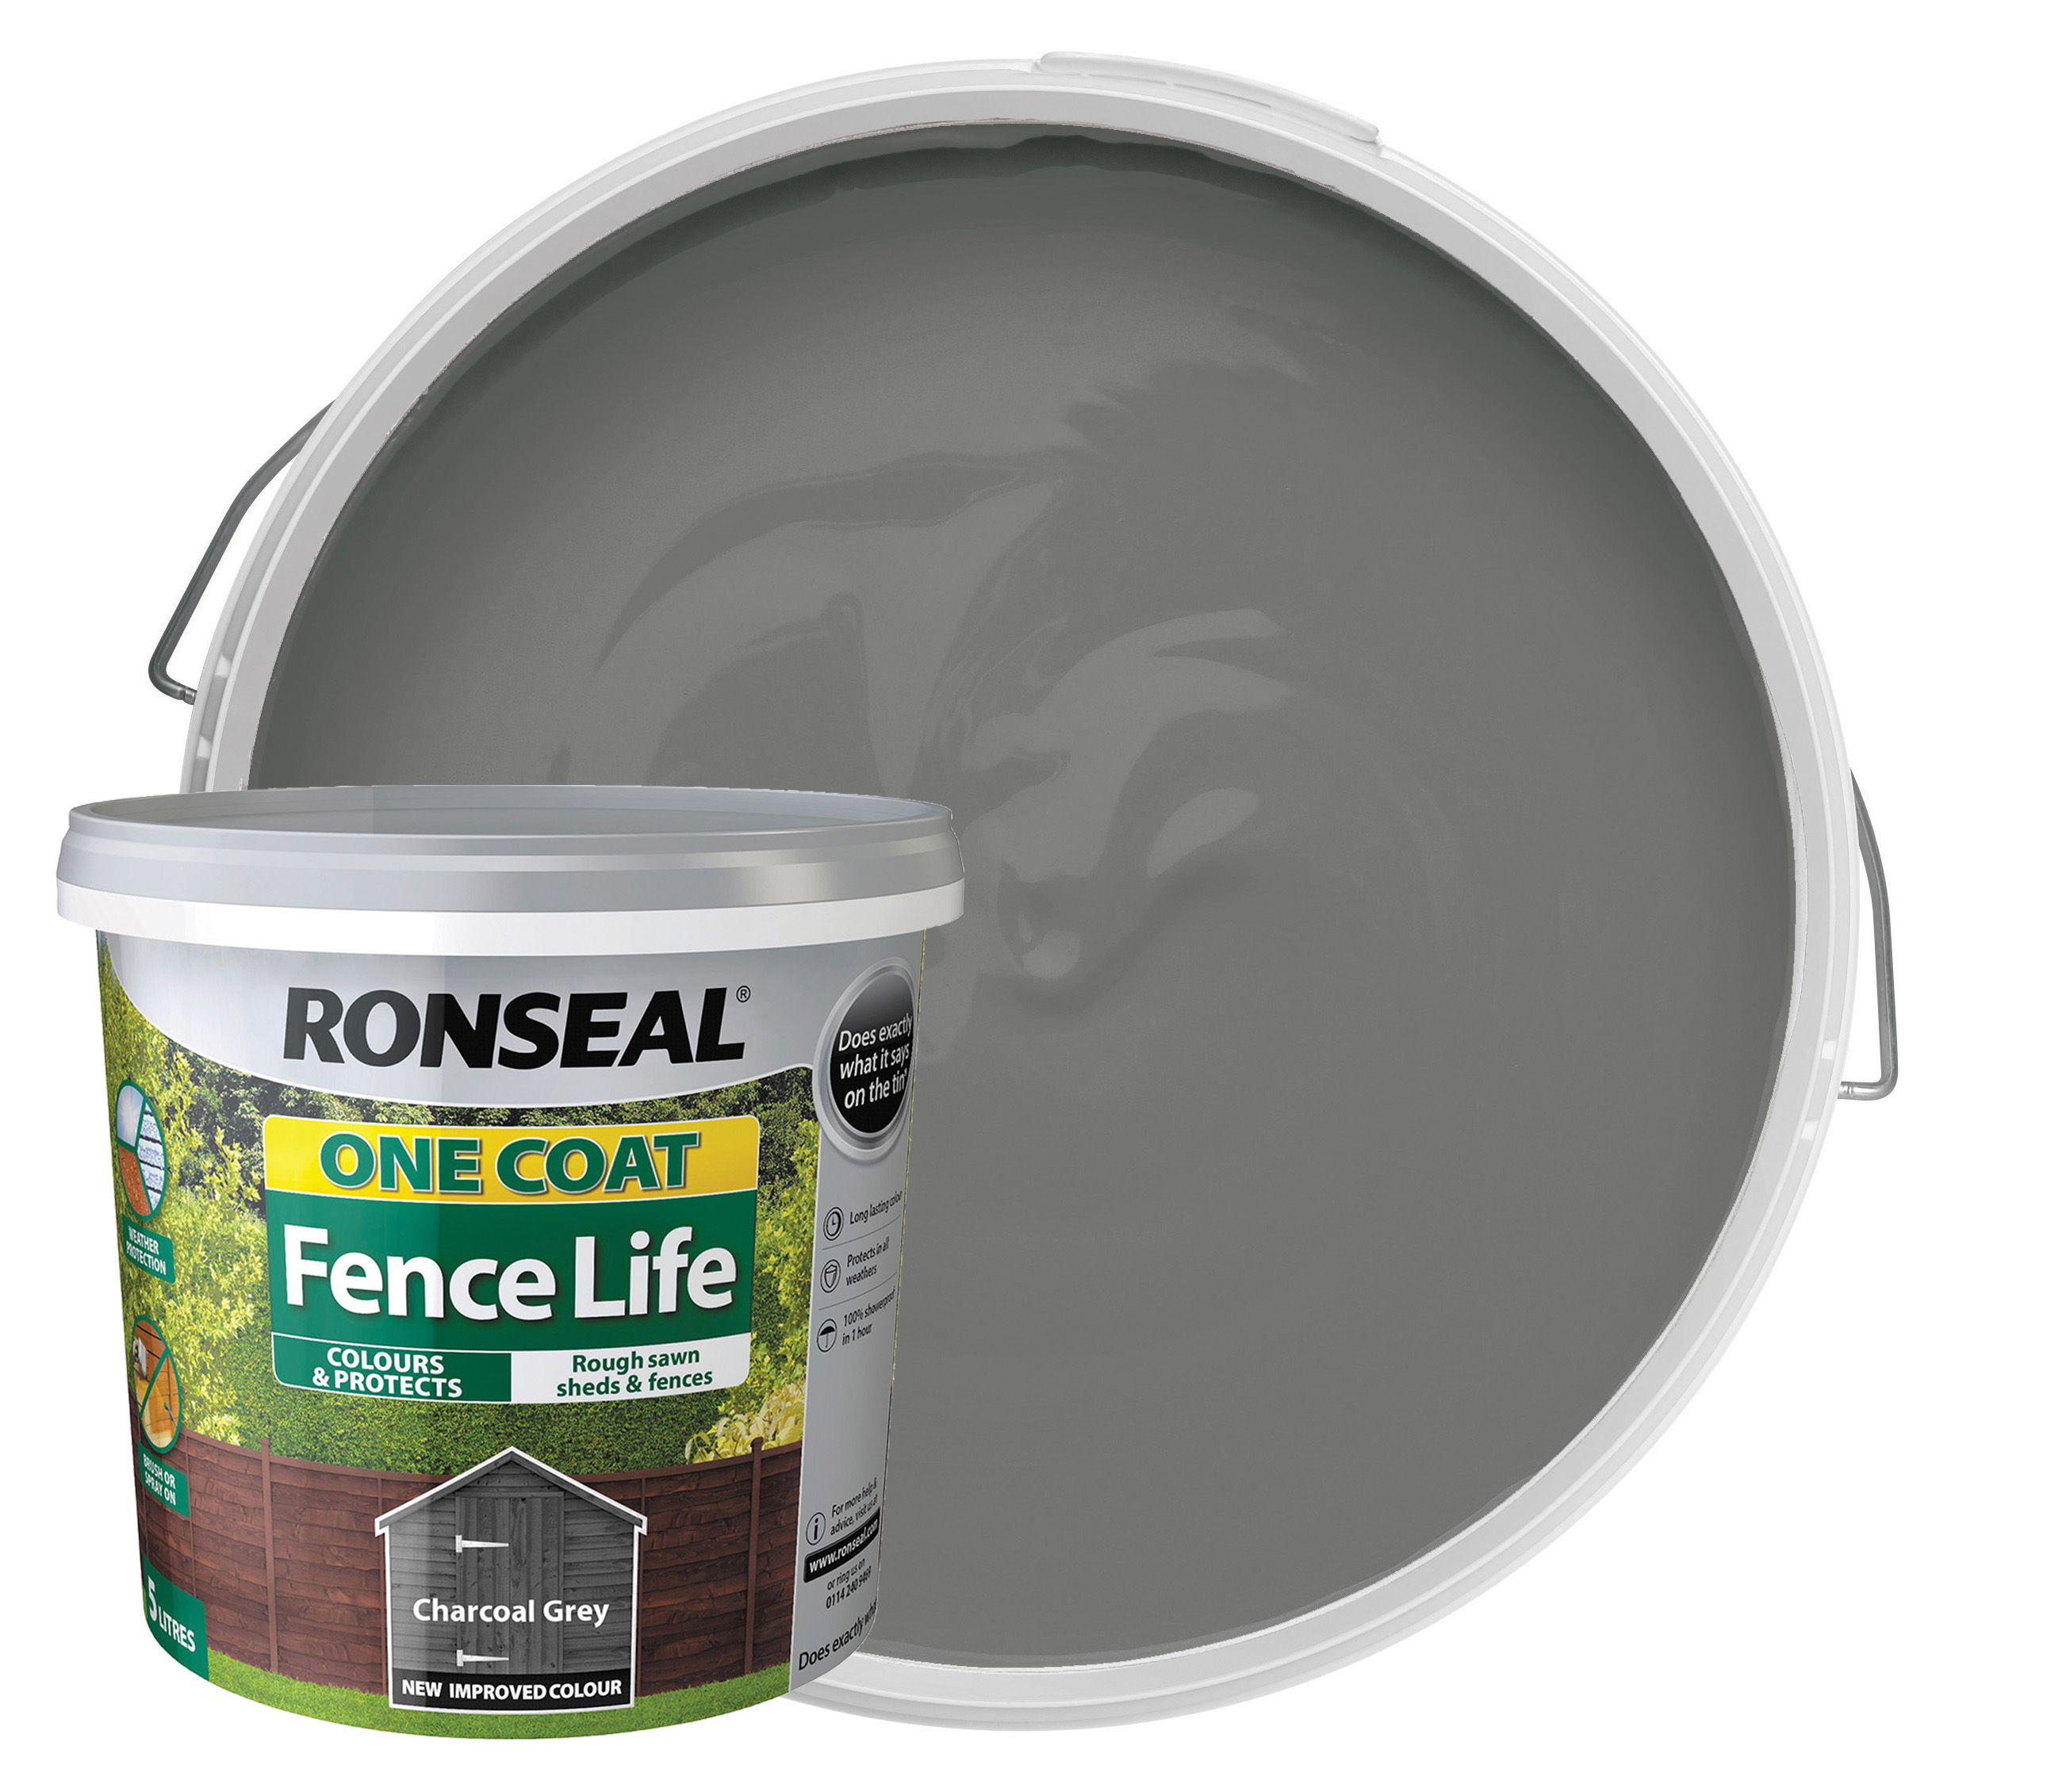 Image of Ronseal One Coat Fence Life Matt Shed & Fence Treatment - Charcoal Grey - 5L